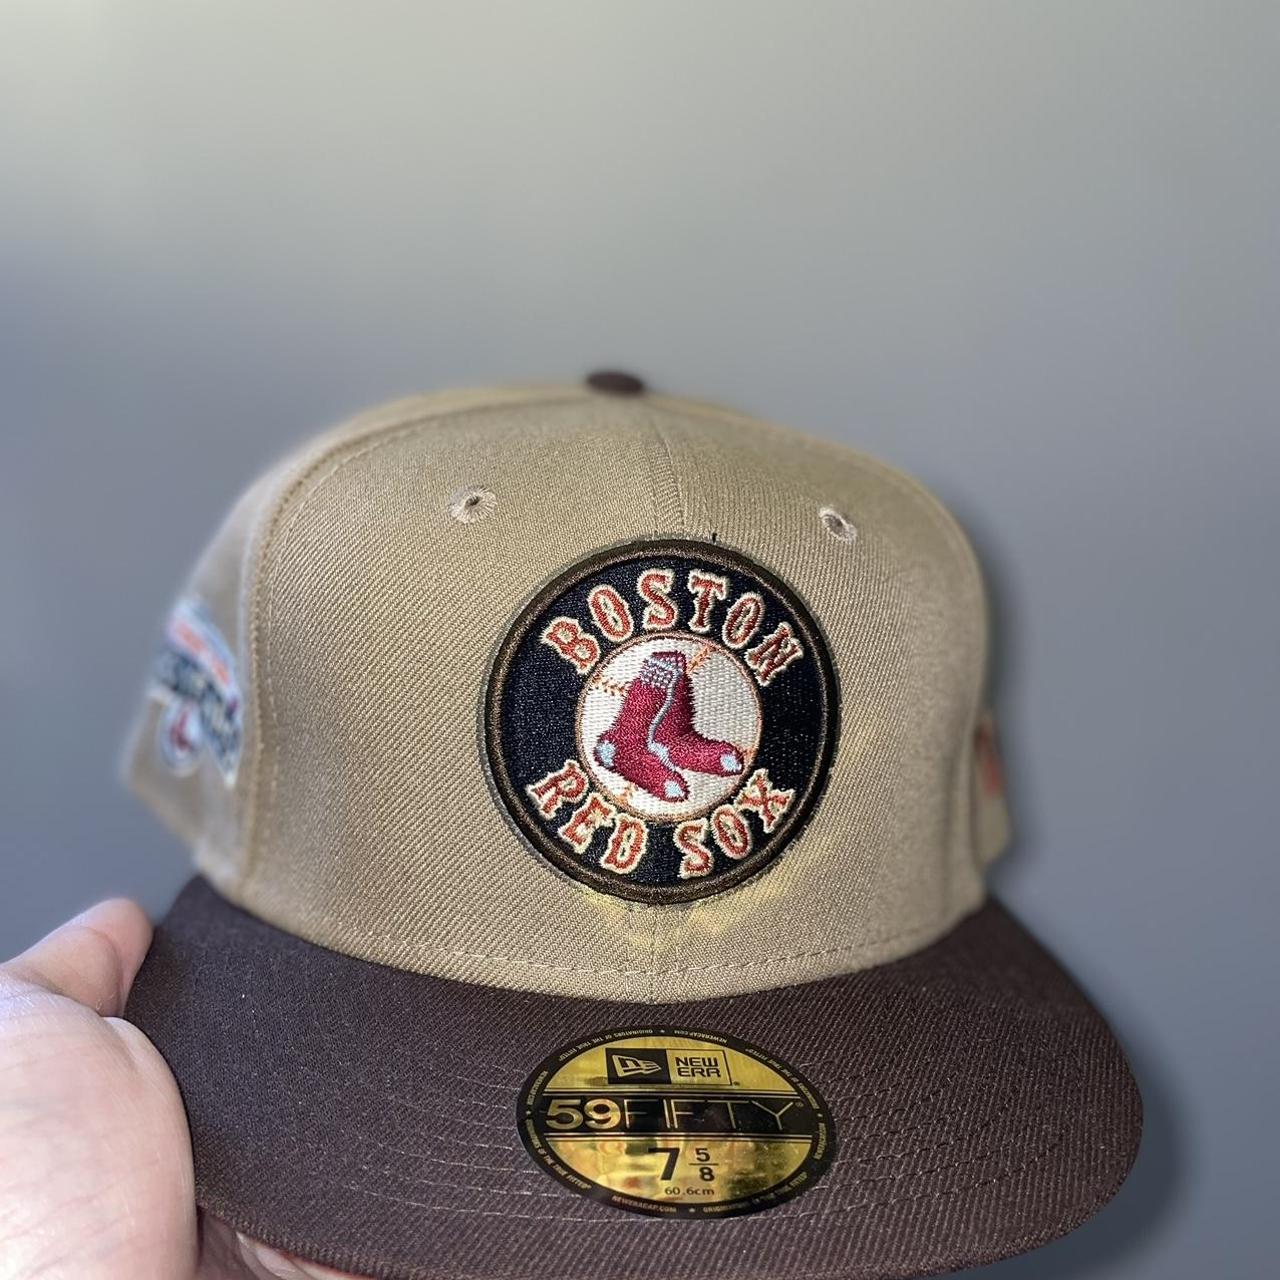 New Era Boston Red Sox Varsity Pin 59FIFTY Fitted Cap Men Caps blue|beige in Size:7 1/2